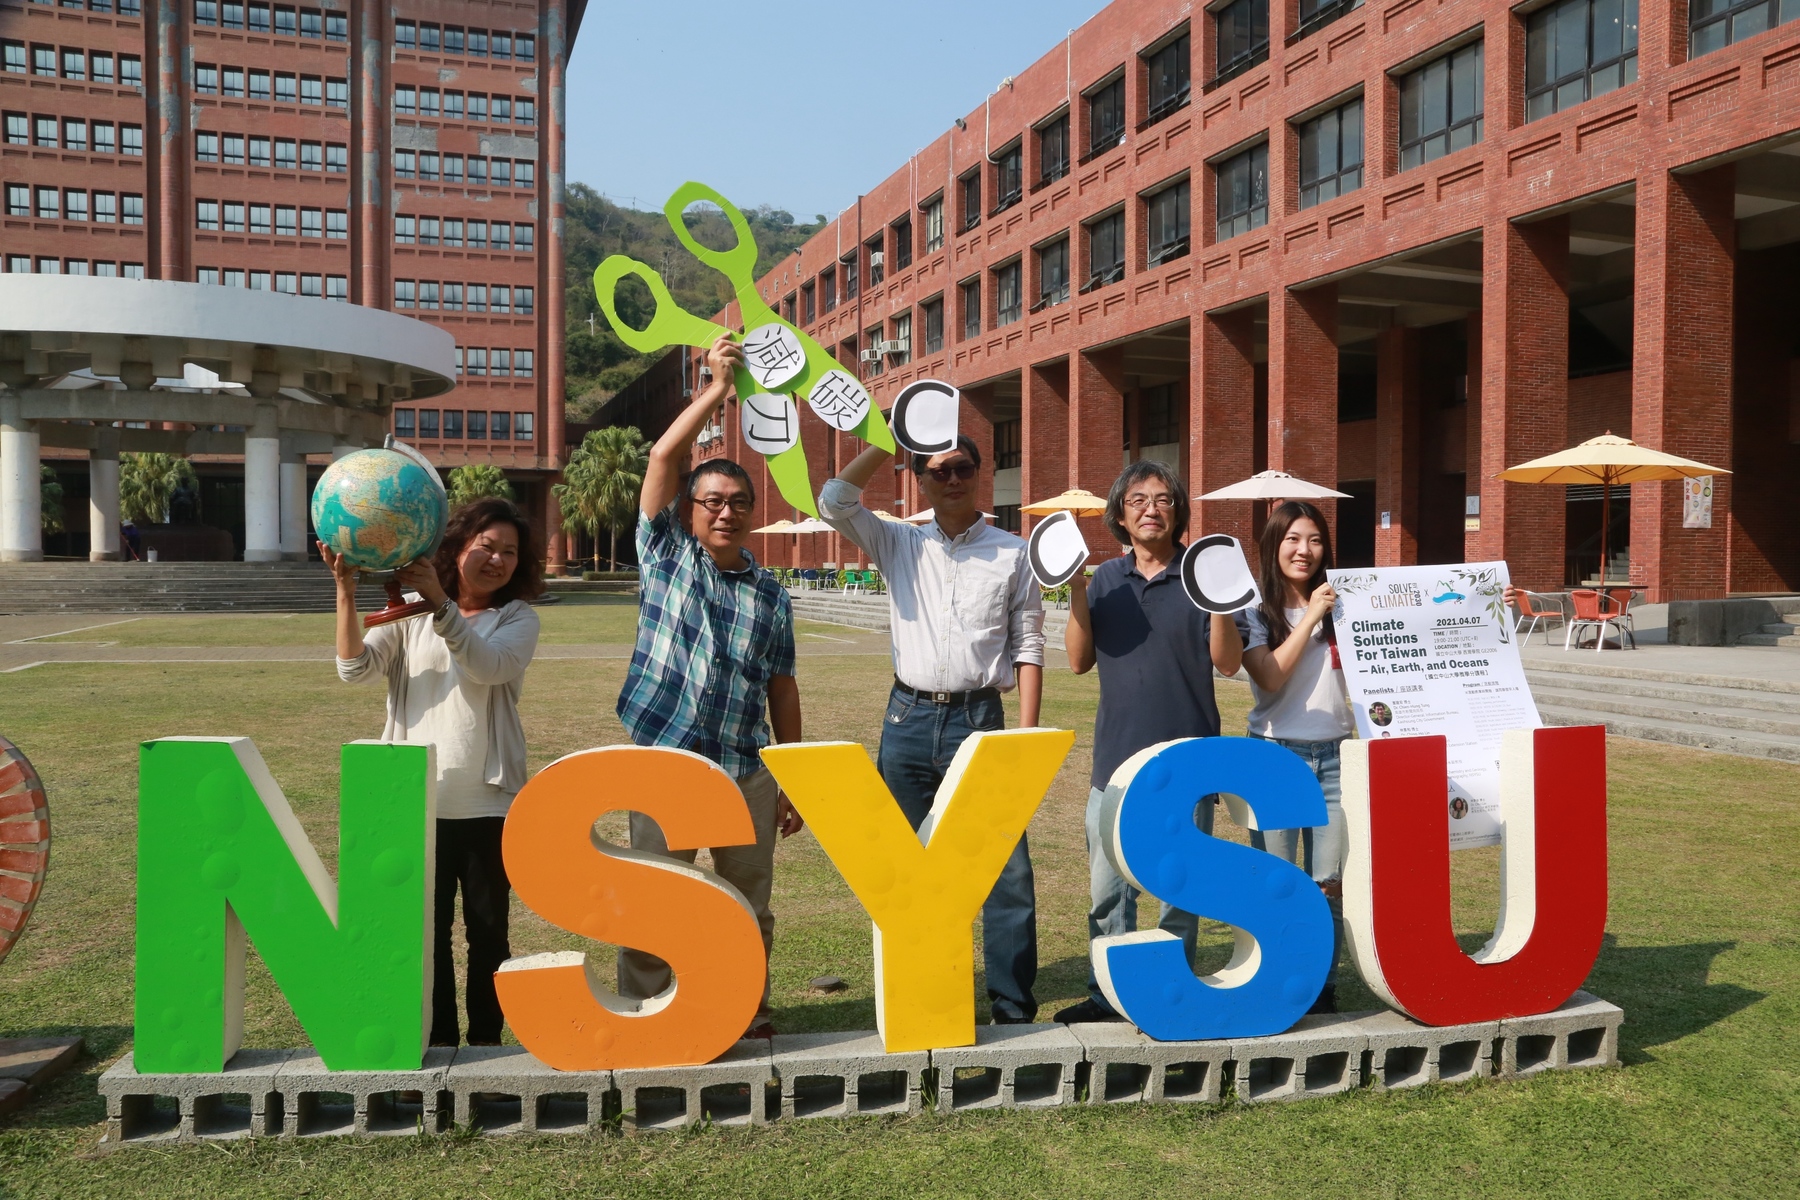 NSYSU, as the only university from Taiwan, is joining more than 100 universities around the world in the Global Dialog of the project by Open Society University Network (OSUN) – Solve Climate By 2030 and will host a webinar on April 7 to focus the world on the critical issue of climate change. From the left are: Regional Coordinator of Solve Climate By 2030 and webinar moderator Associate Professor Chi-I Lin, NSYSU Vice President for International Affairs and webinar moderator Chih-Wen Kuo, Associate Professor of the Department of Oceanography at NSYSU and webinar speaker Yuan-Pin Chang, webinar moderator Assistant Professor Yuh-Yuh Li, and Solve Climate by 2030 intern Jou-Ying Lin.